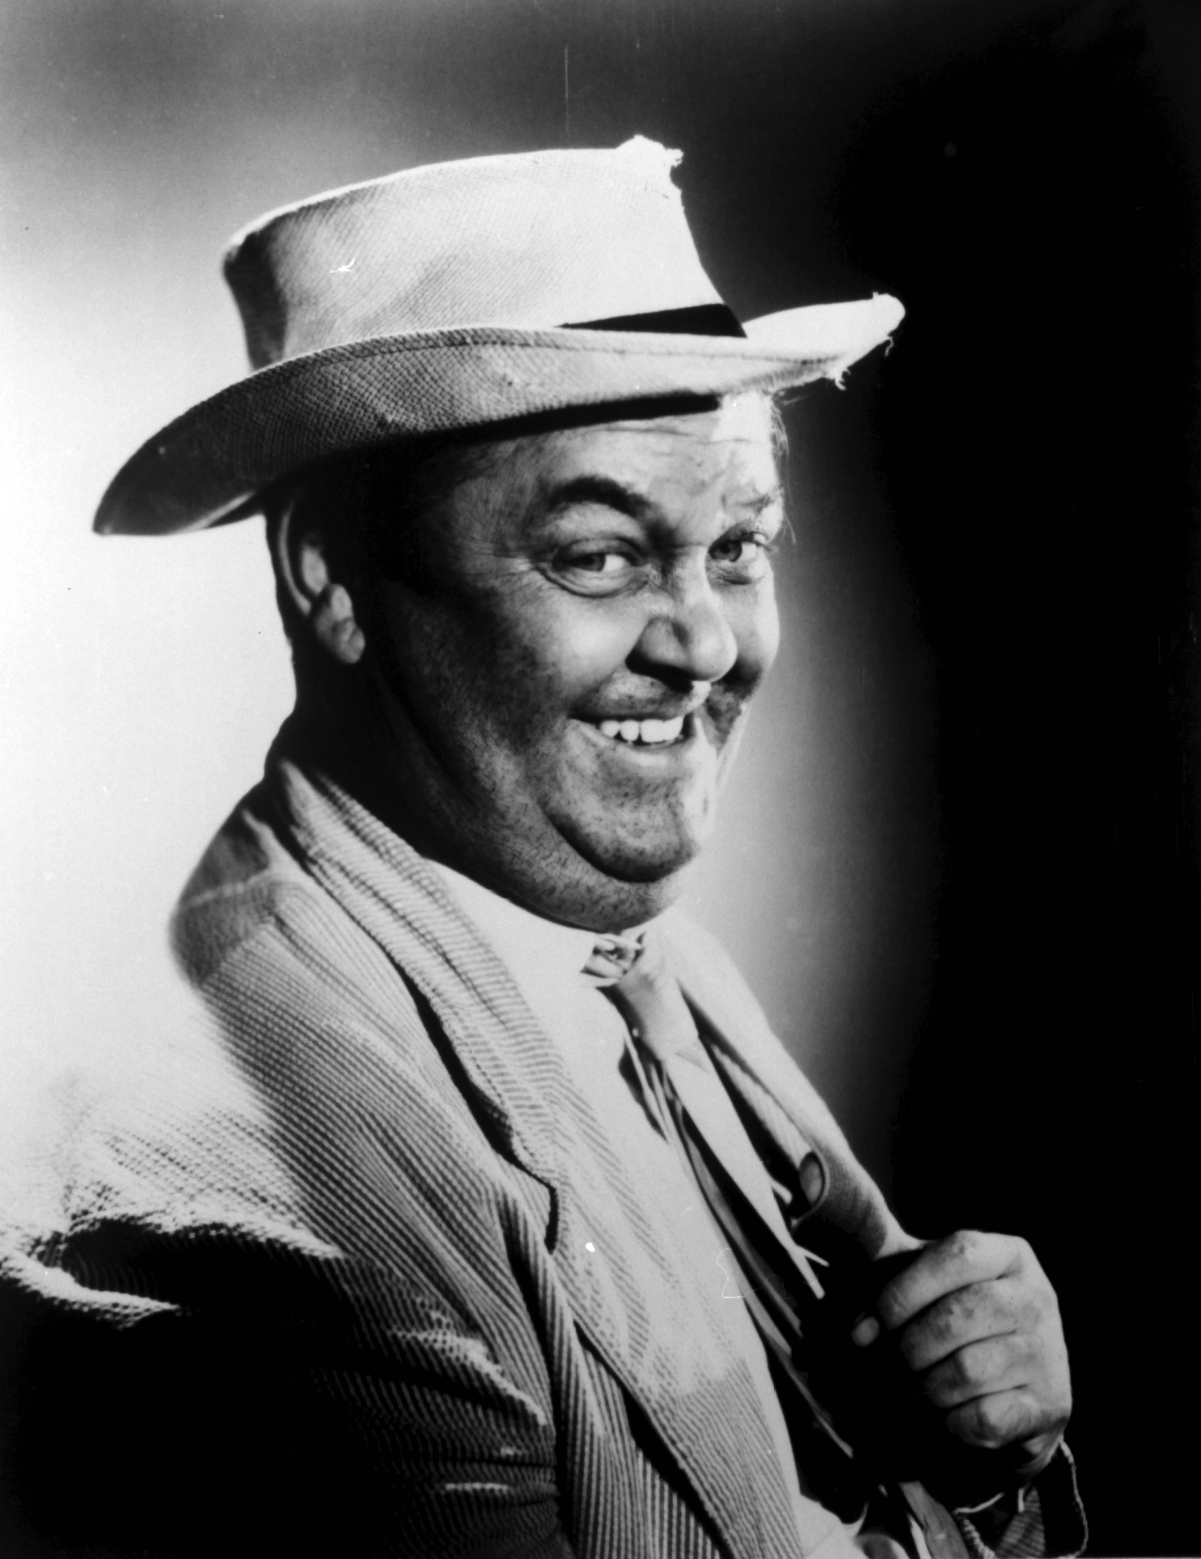 Actor Hal Smith wearing hat and smiling as Otis Campbell on 'The Andy Griffith Show,' 1960